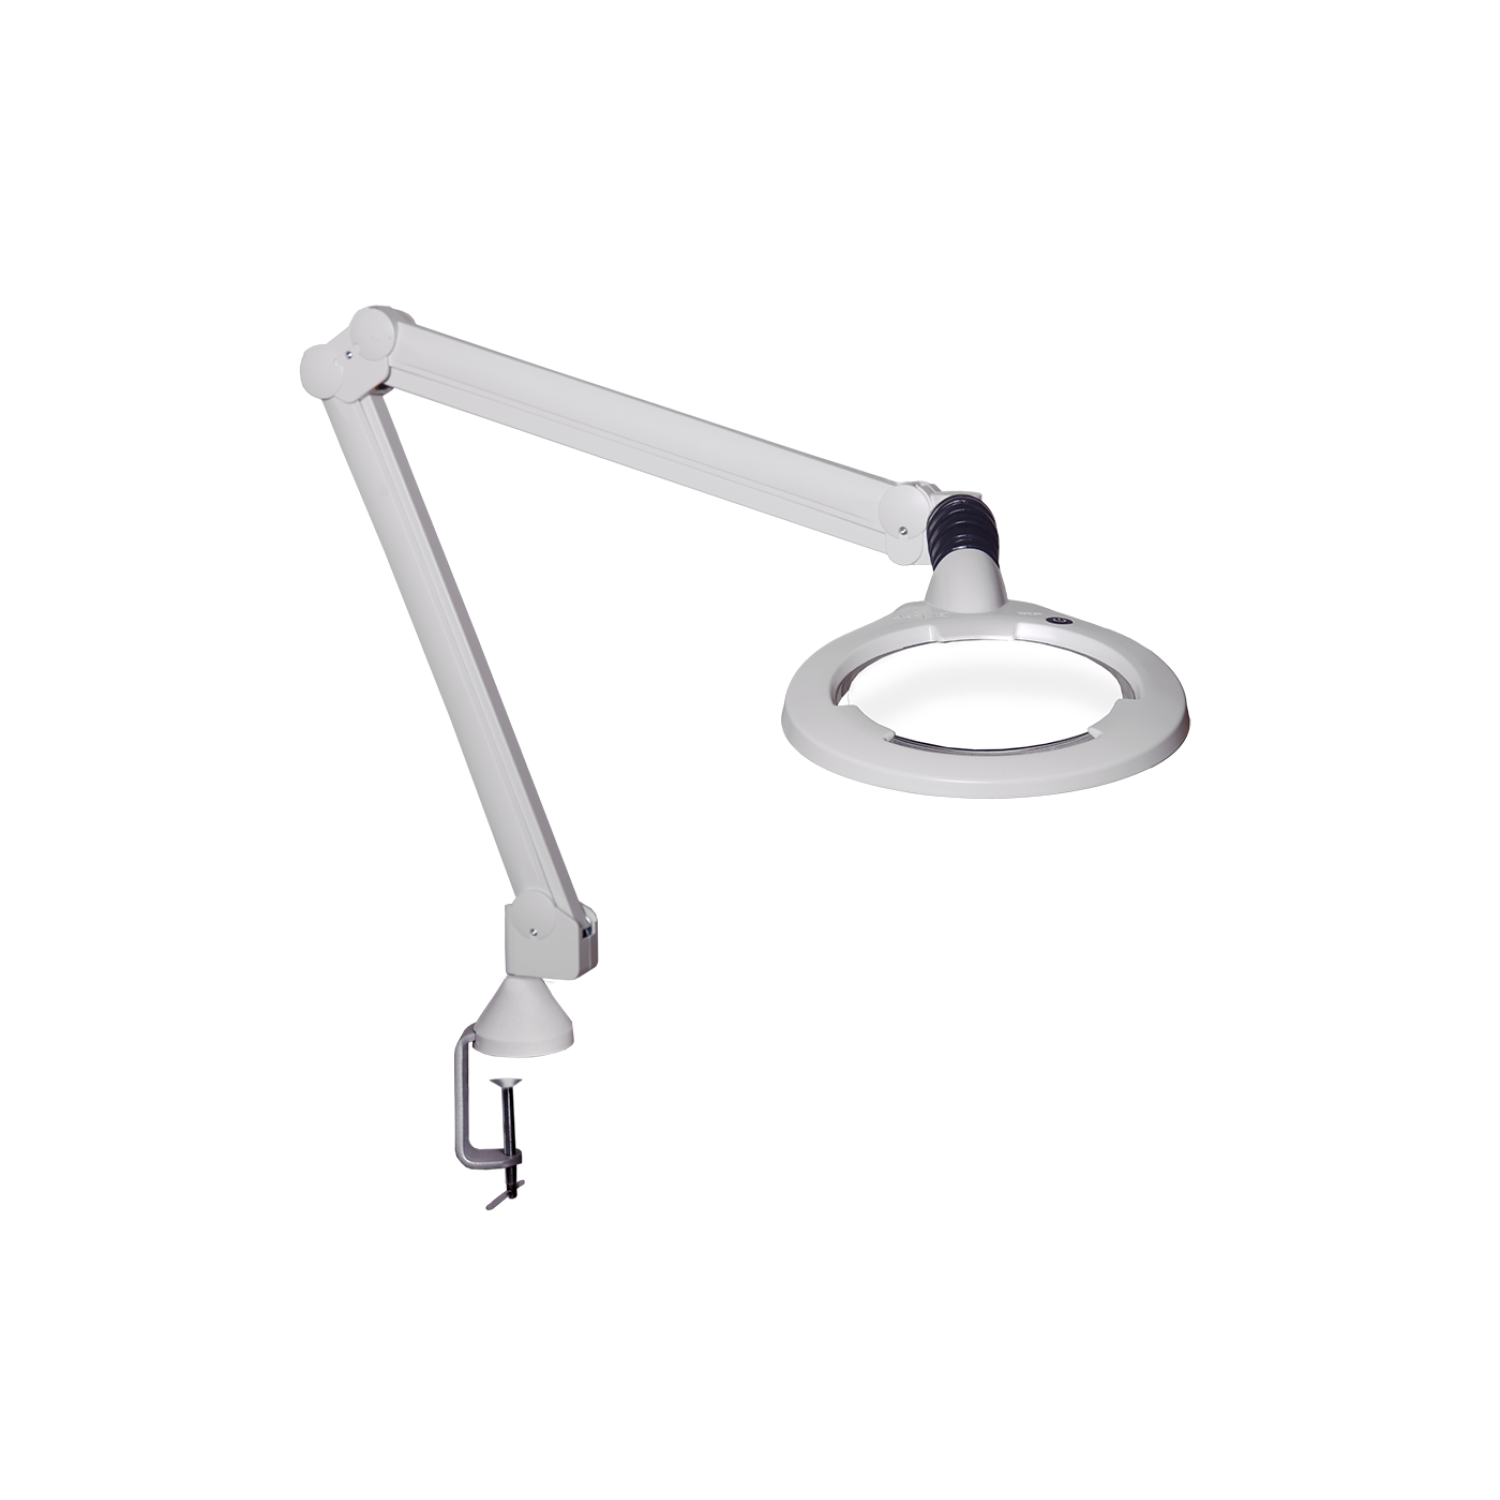 Luxo Circus LED Magnifier 45" Arm w/ 5-Diopter, 6" Lens, Clamp Mount, White